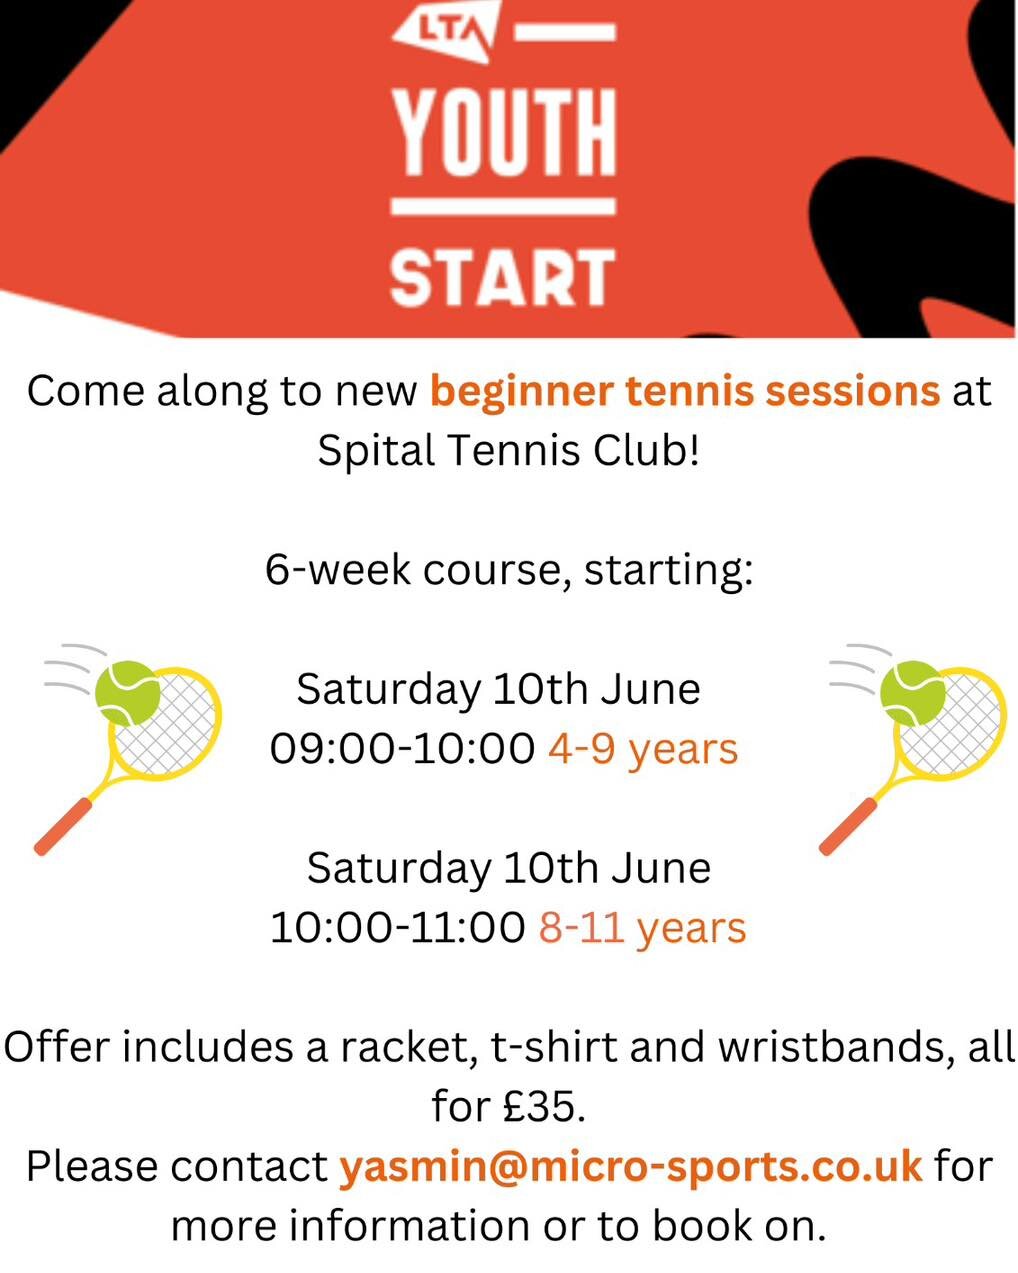 Hi Everyone!

Spital Tennis Club have an exciting new programme starting after half term for children aged 4-10 years old. 

Children will get 6 lessons, plus a racket, tshirt, wristbands and balls, all for &pound;35! 

This is run by an experienced 